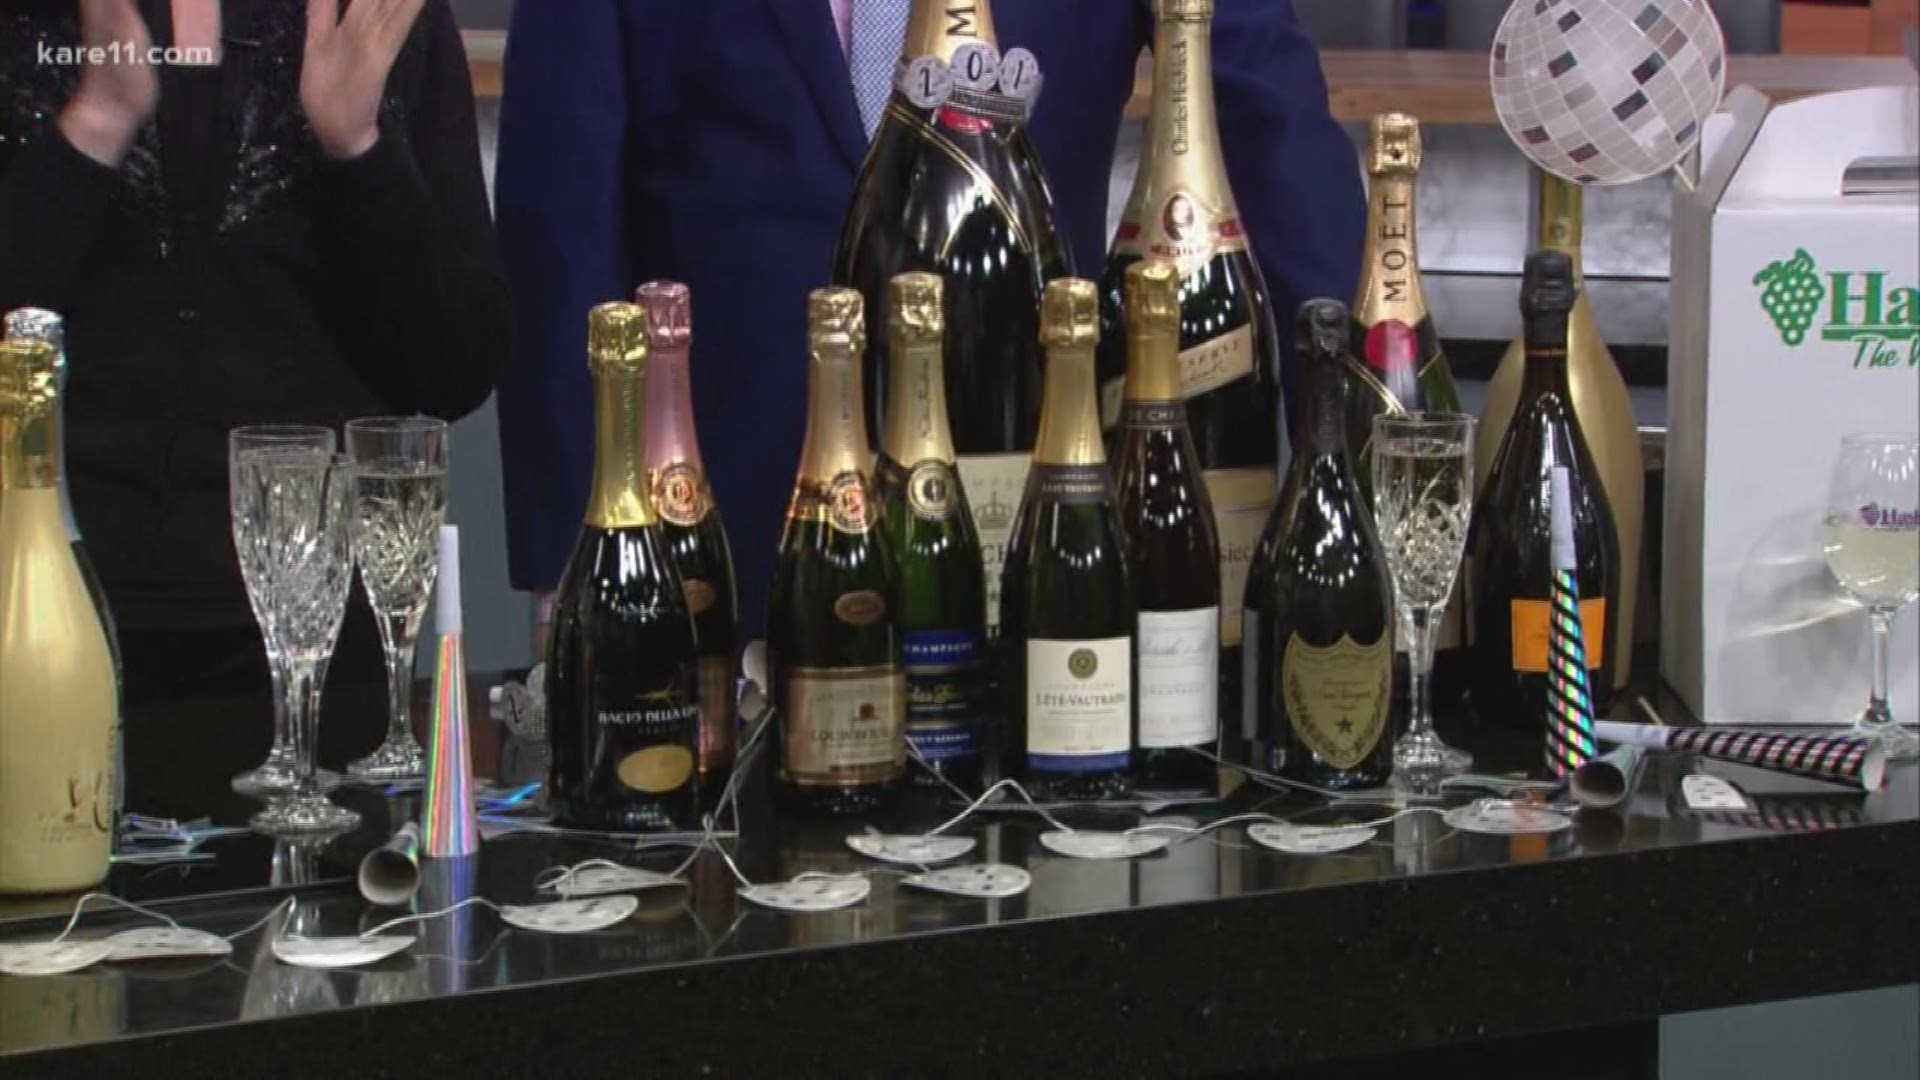 Beau Farrell from Haskell's helps you choose that perfect glass of bubbly to ring in 2019.